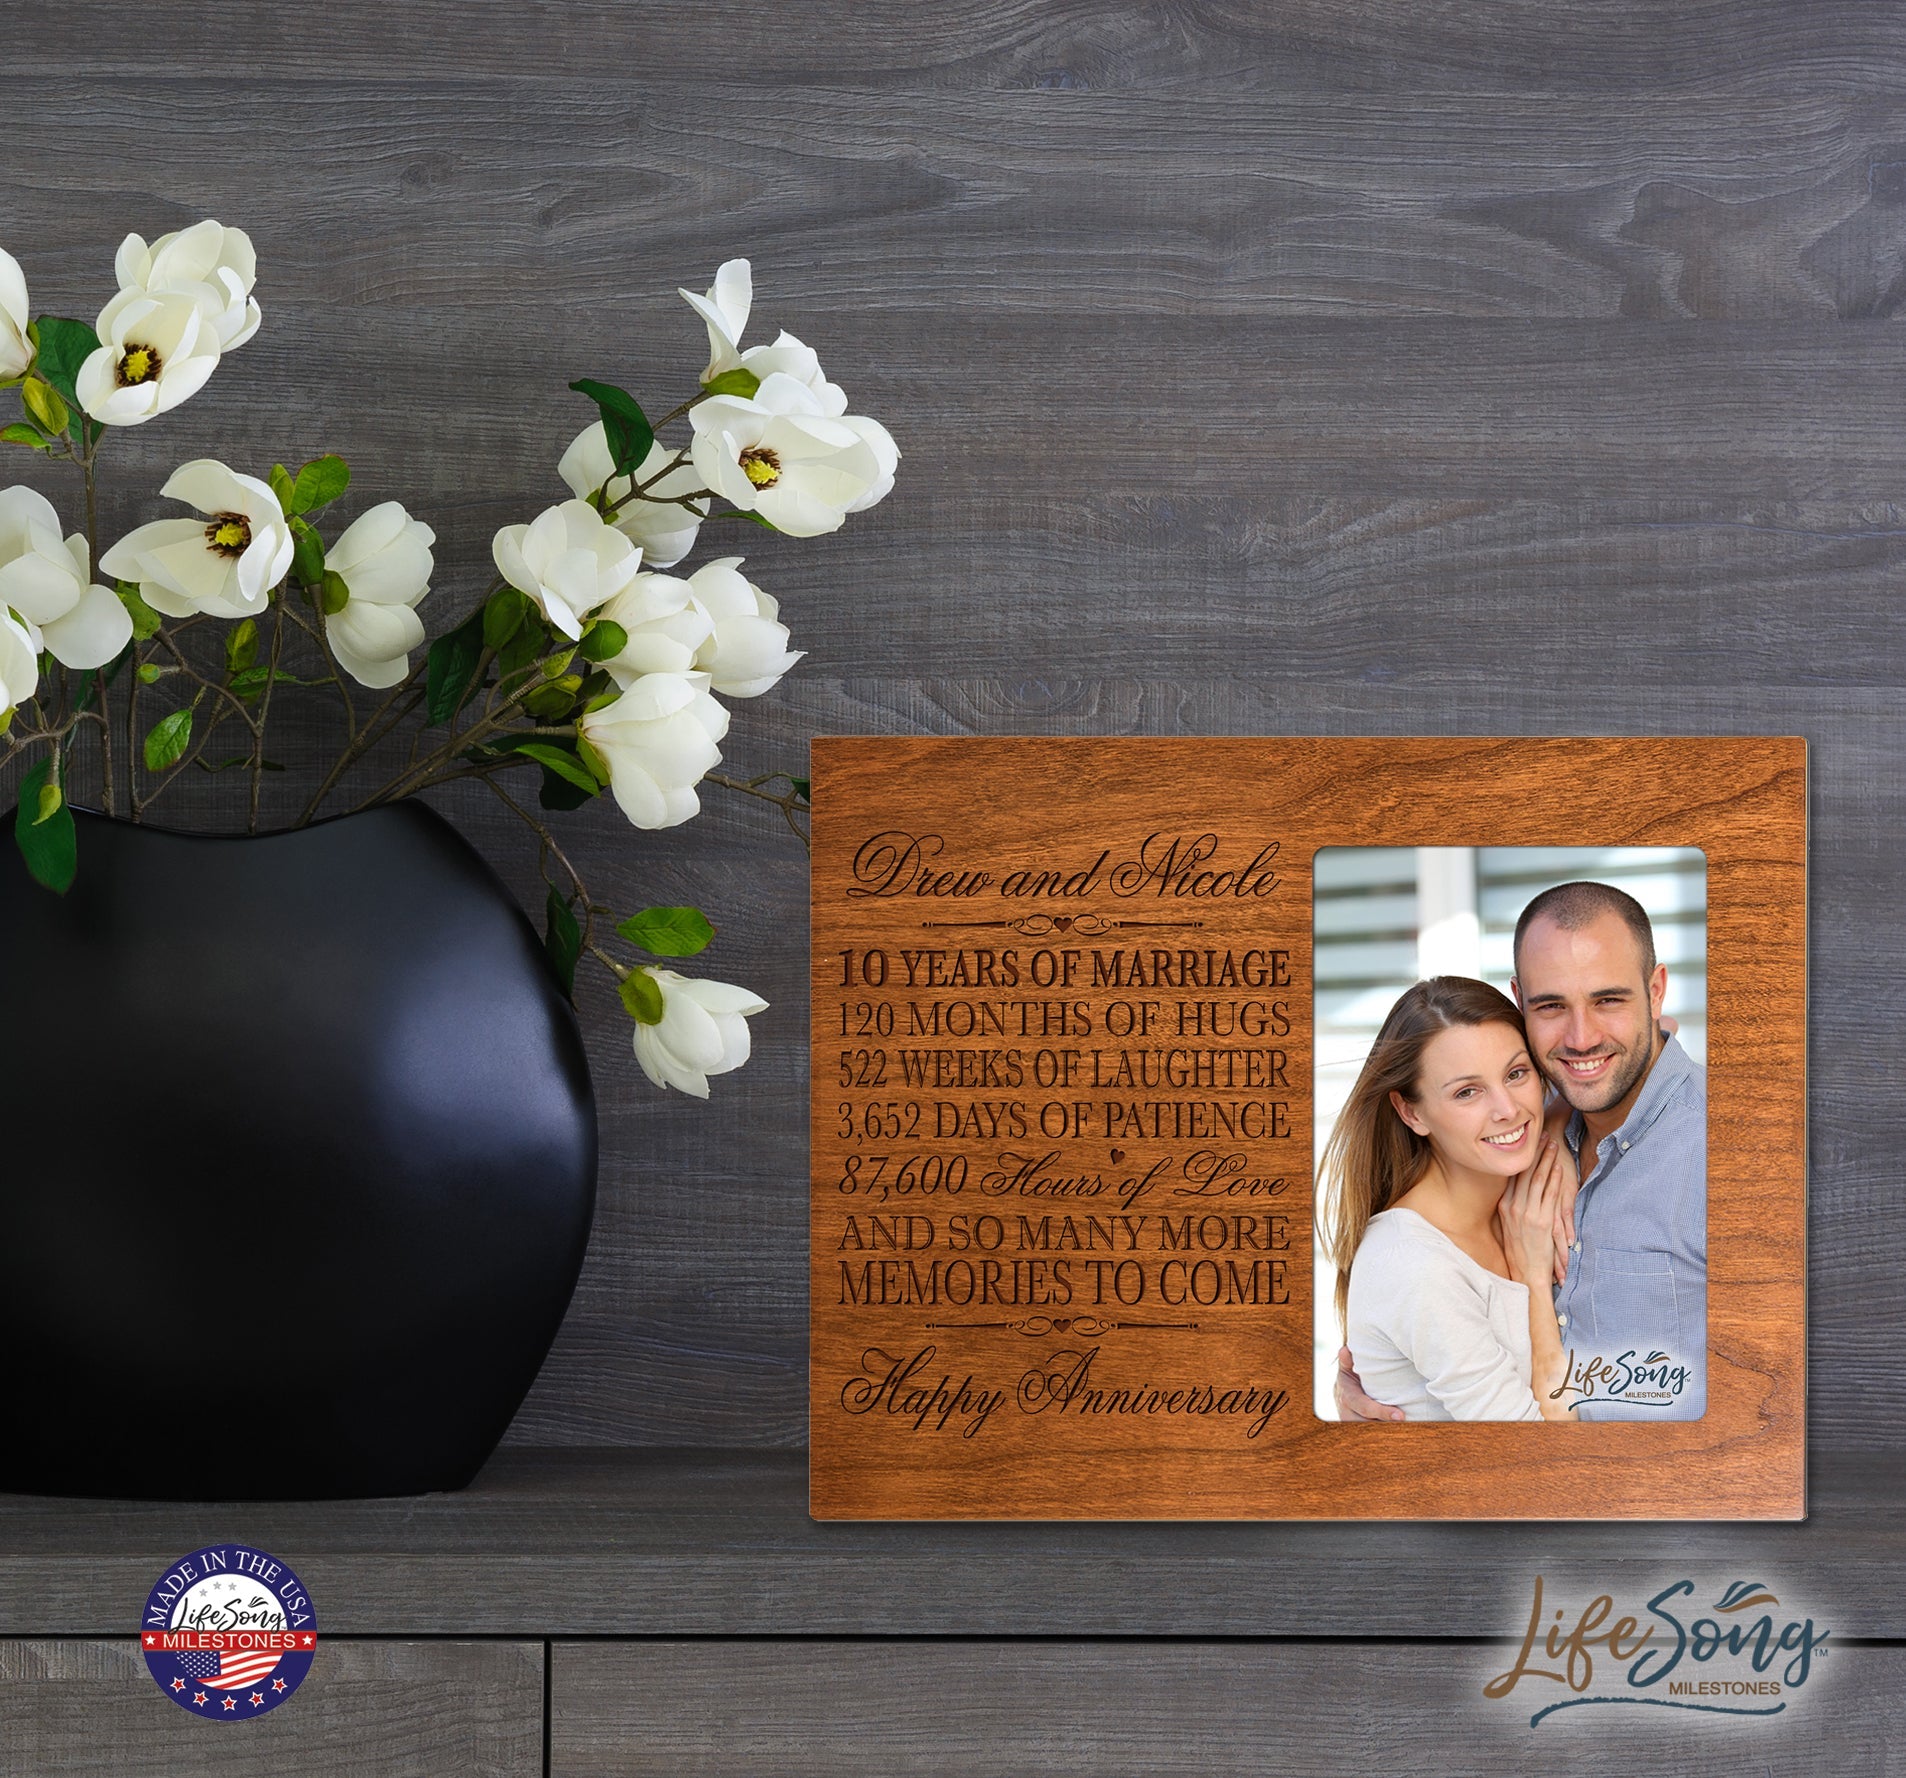 Personalized Couples 10th Wedding Anniversary Picture Frame Decorations - Many More Memories To Come - LifeSong Milestones